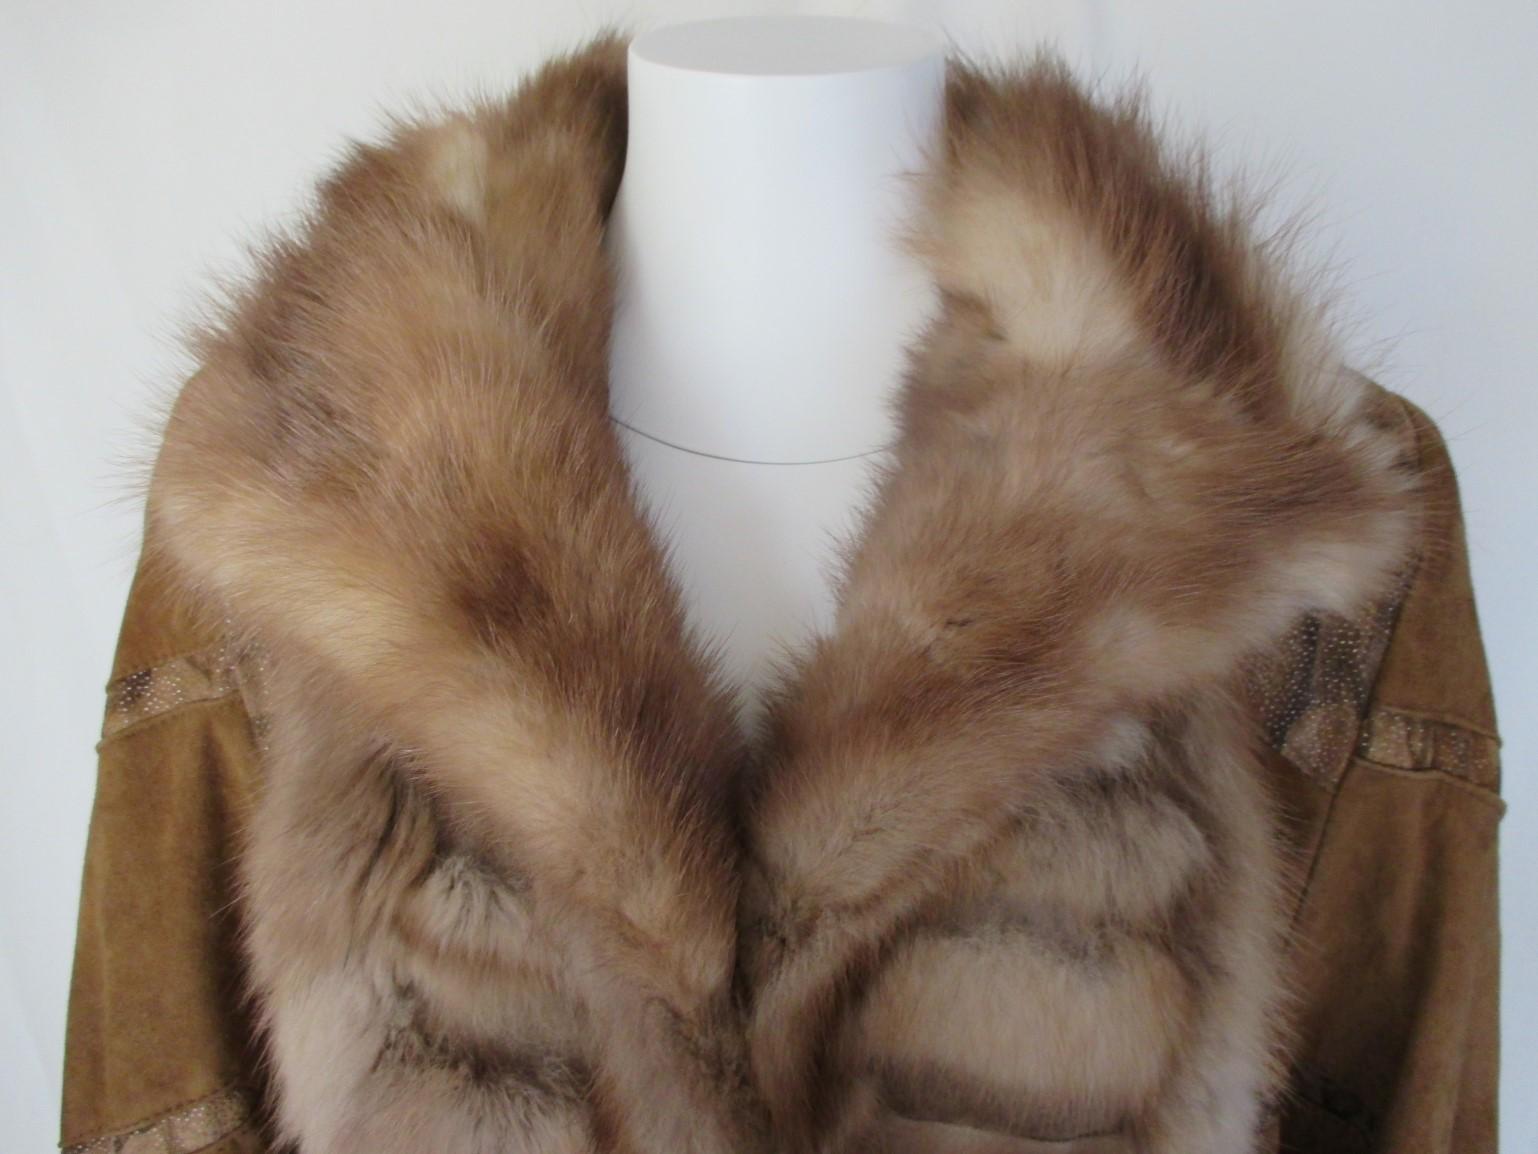 Exclusive hand-made Tsonas Creations sable fur swing coat from Crans-Montana, Switzerland. 

We offer more exclusive fur items, view our frontstore.

Details:
Made of quality sable fur with decorated soft and supple lambskin leather
Its easy and